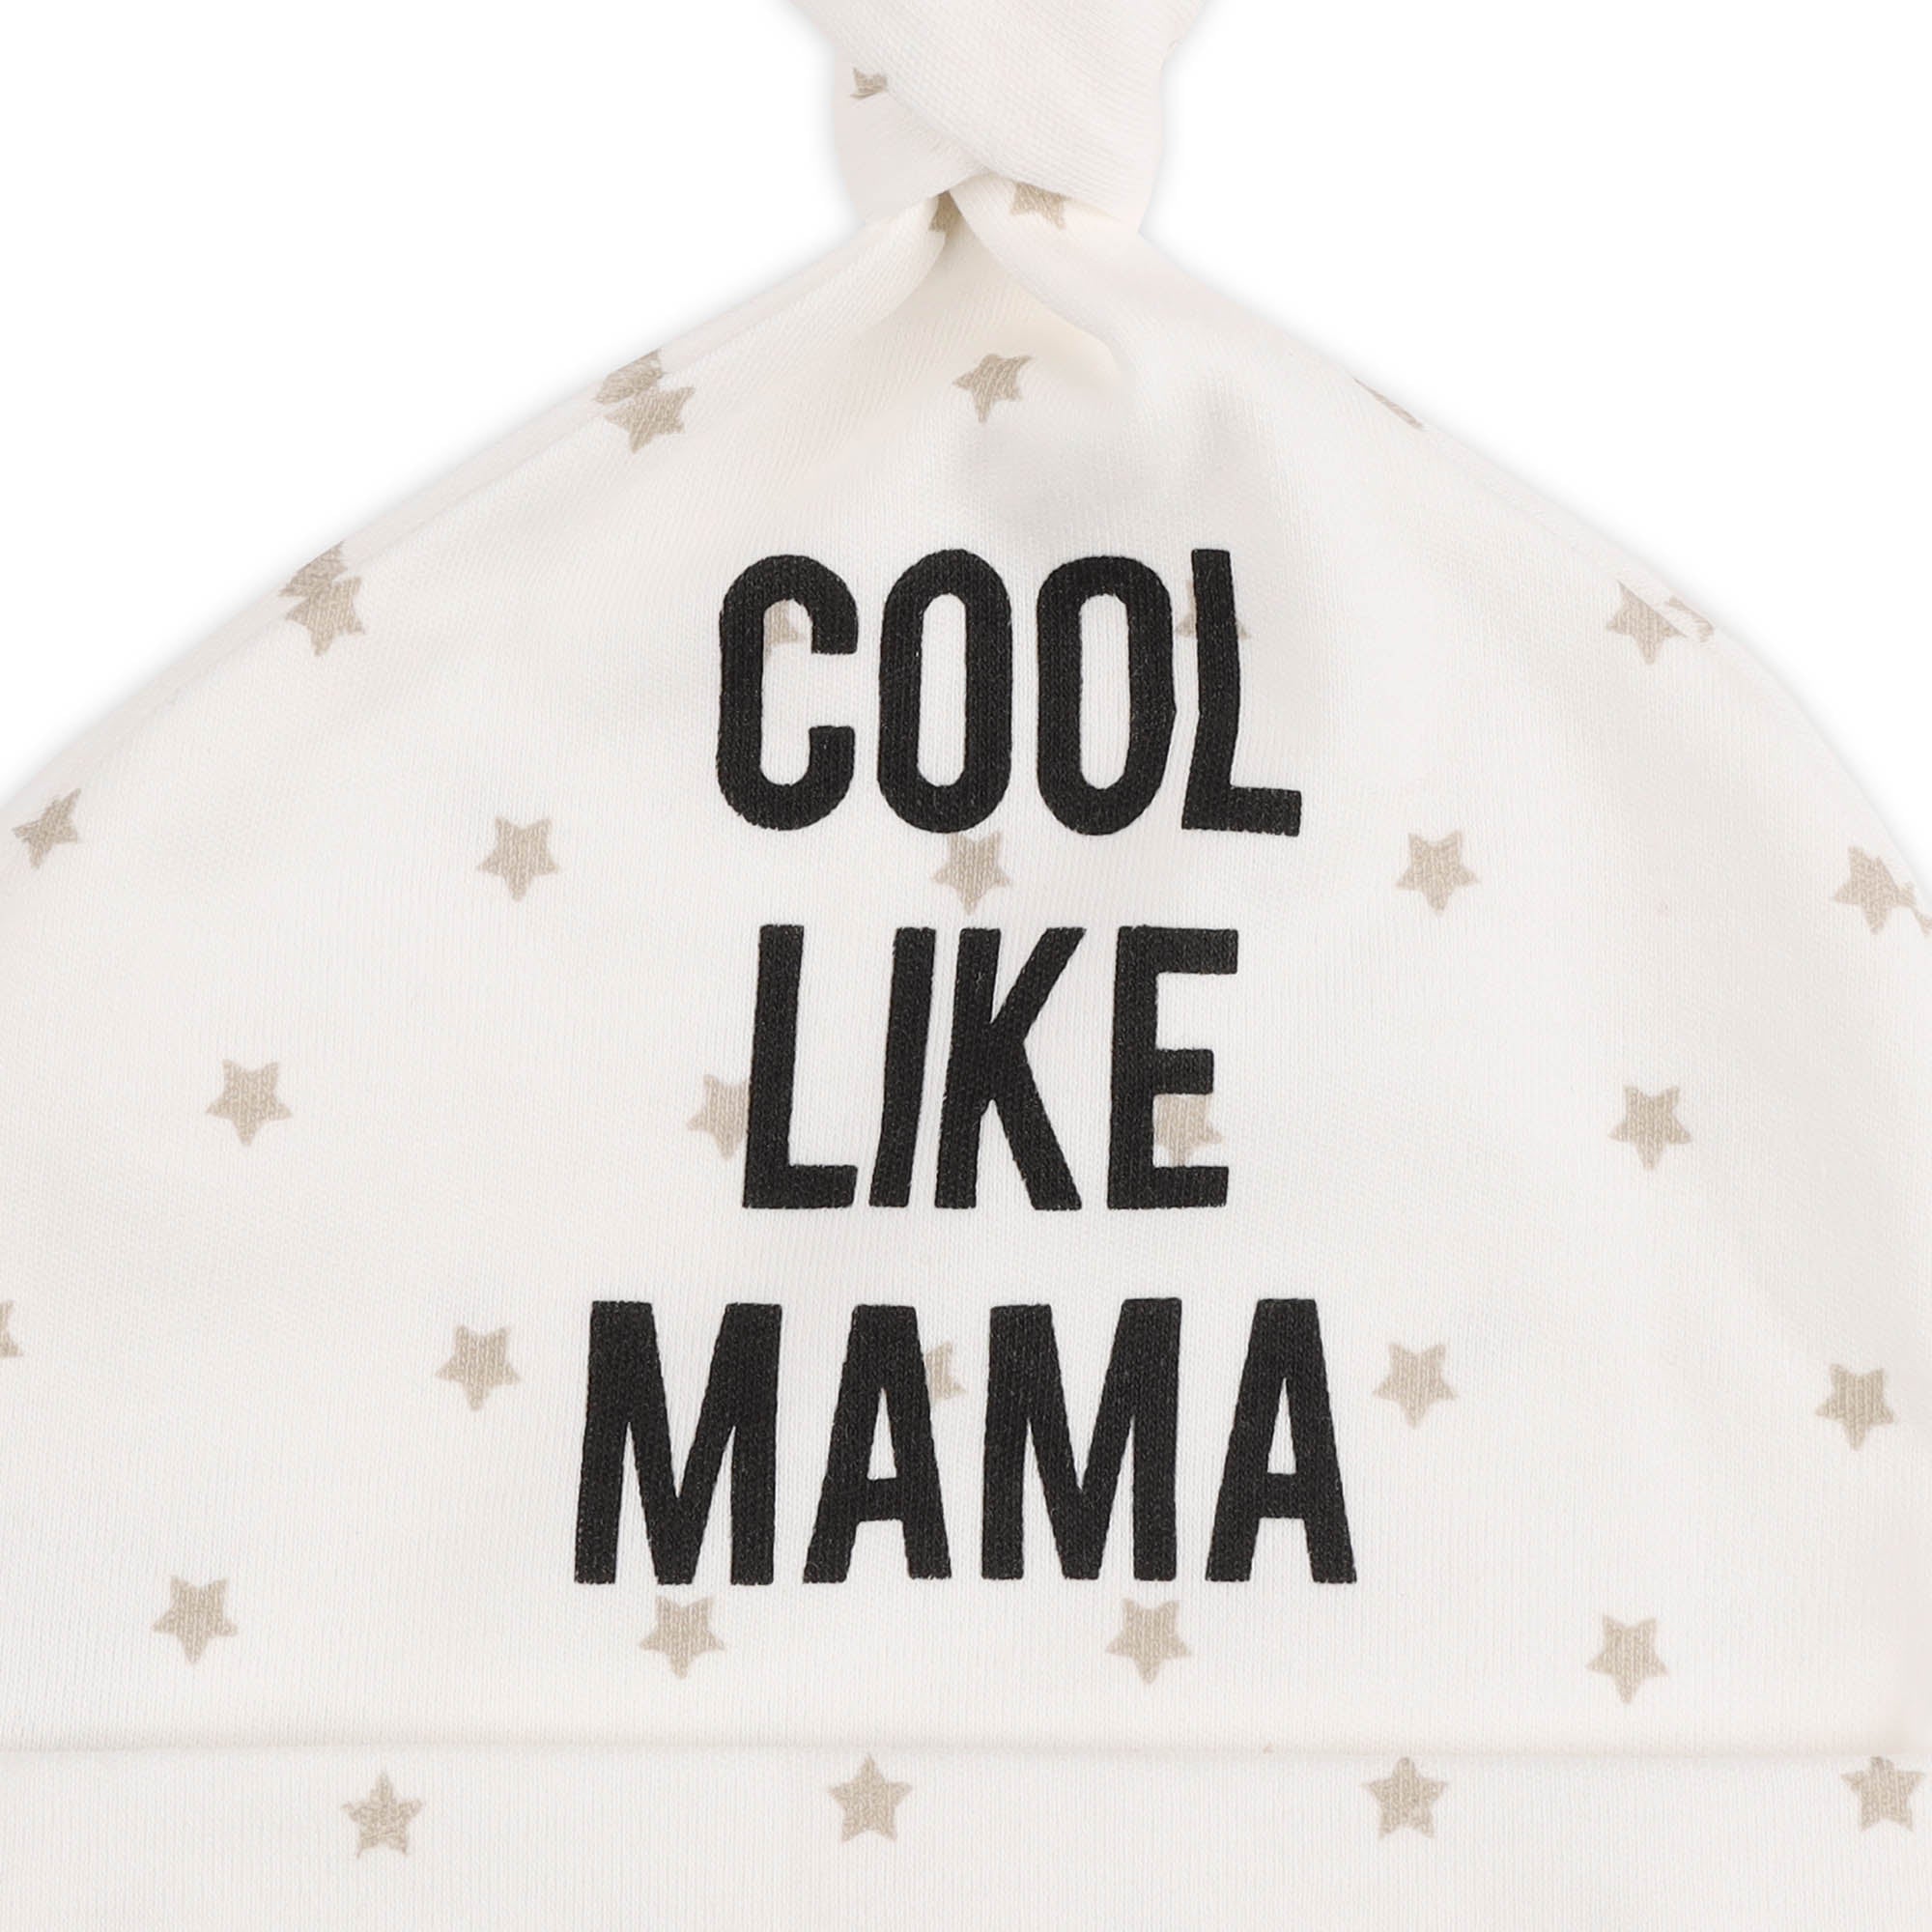 Kicks & Crawl- Cool Like Mama Knotted Caps - Pack of 3